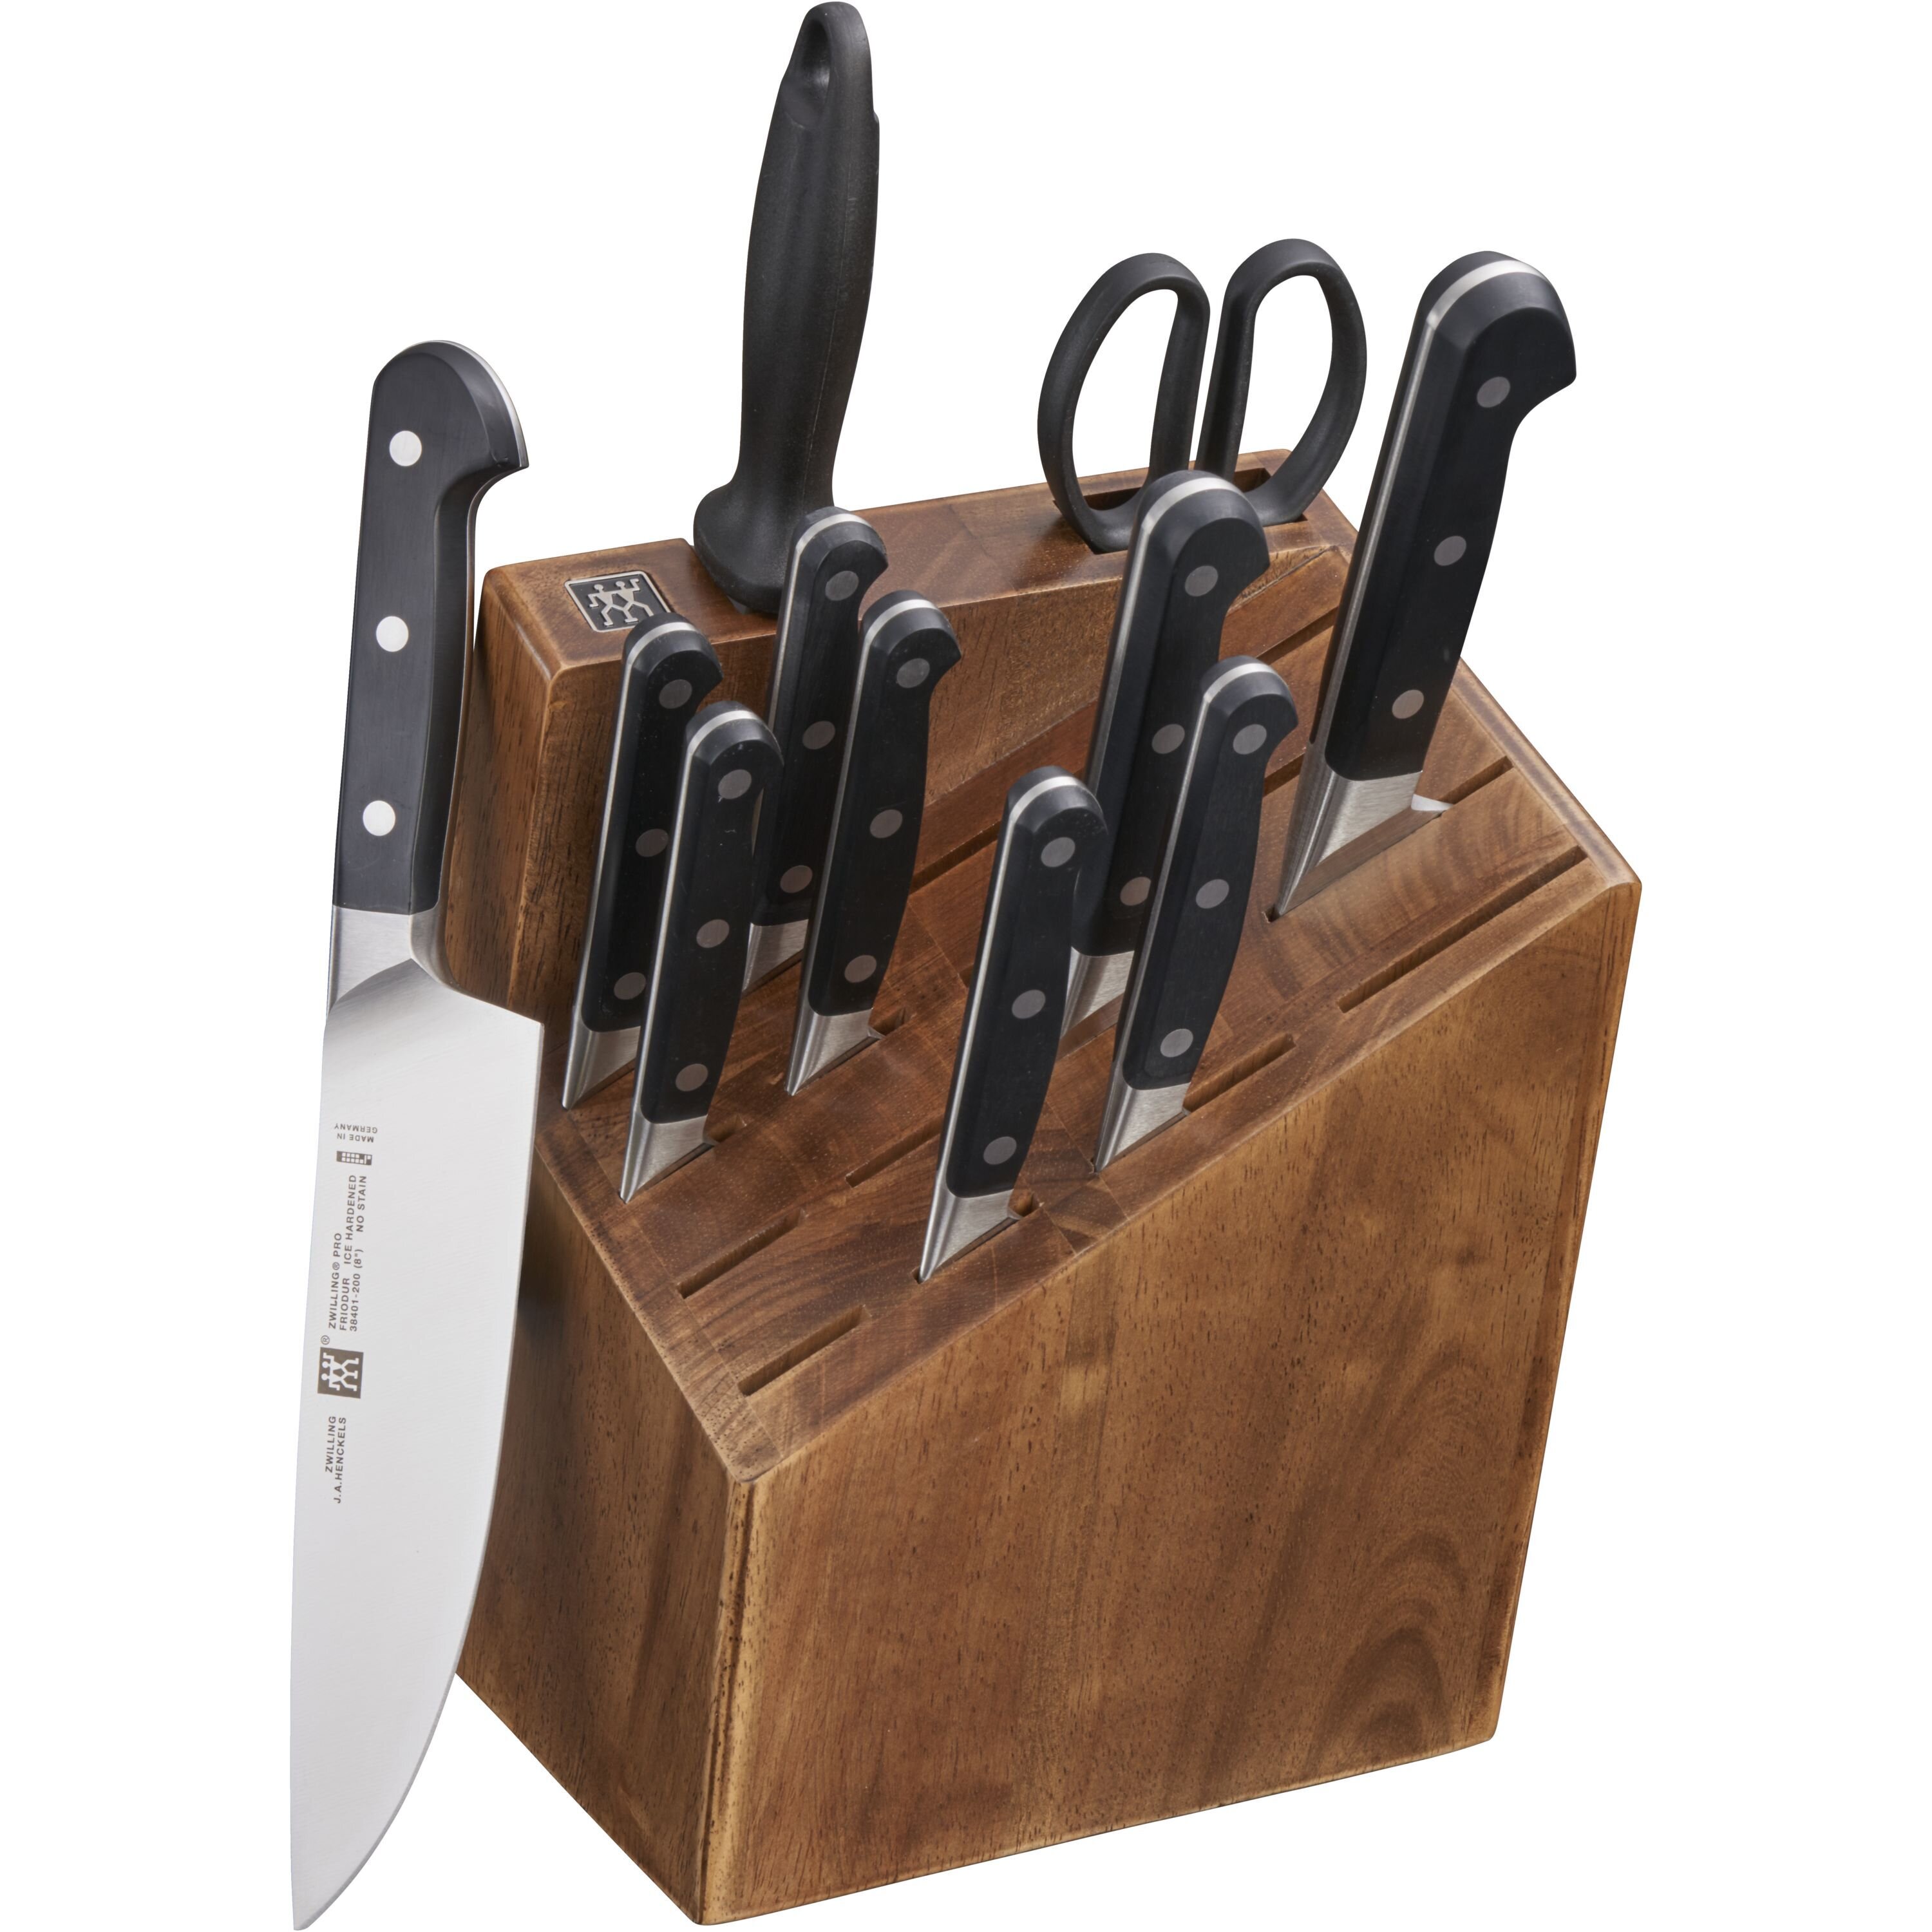 ZWILLING J.A. Henckels Zwilling Professional S 20-piece Knife Block Set &  Reviews